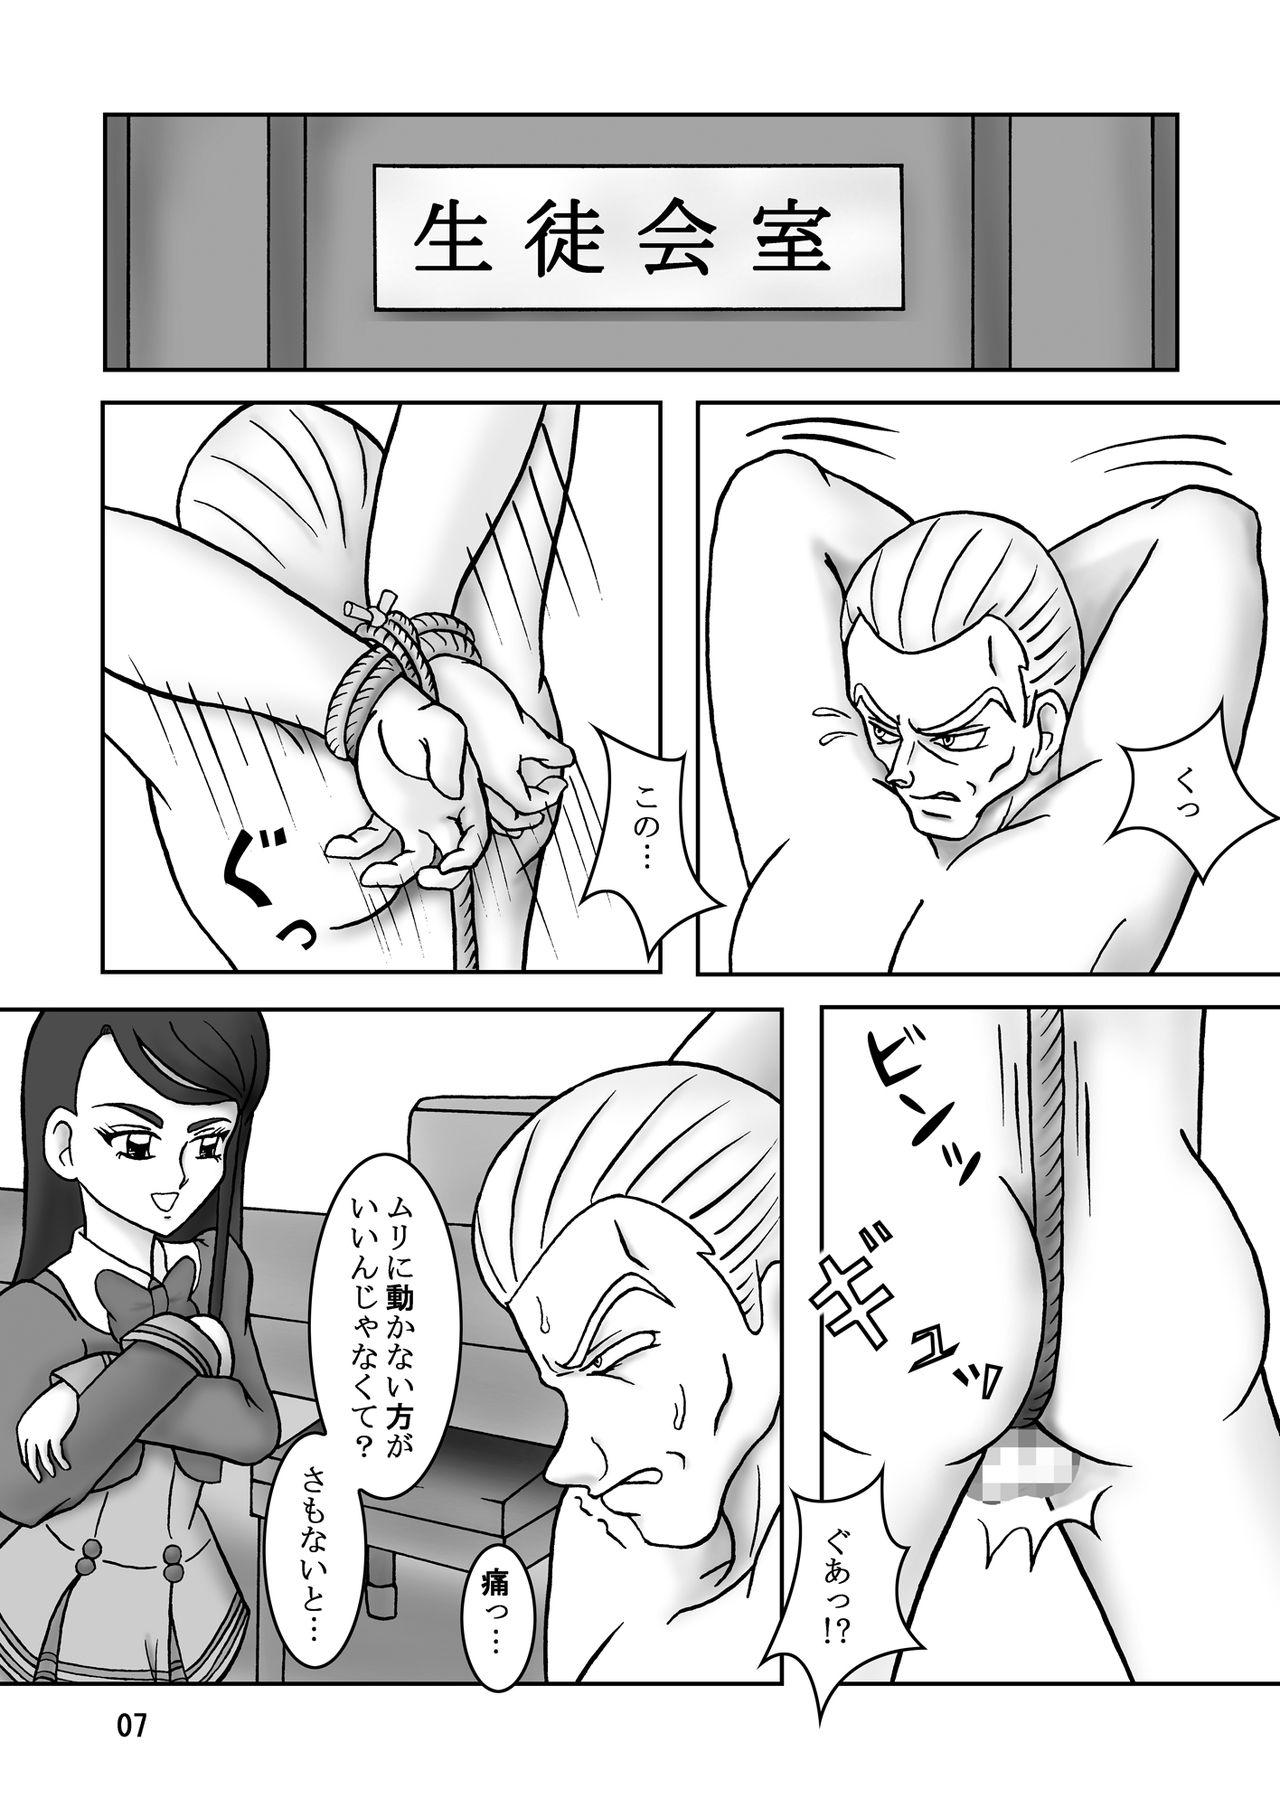 Leite Yes！ズリキュア5 - Yes precure 5 Dick Suck - Page 9